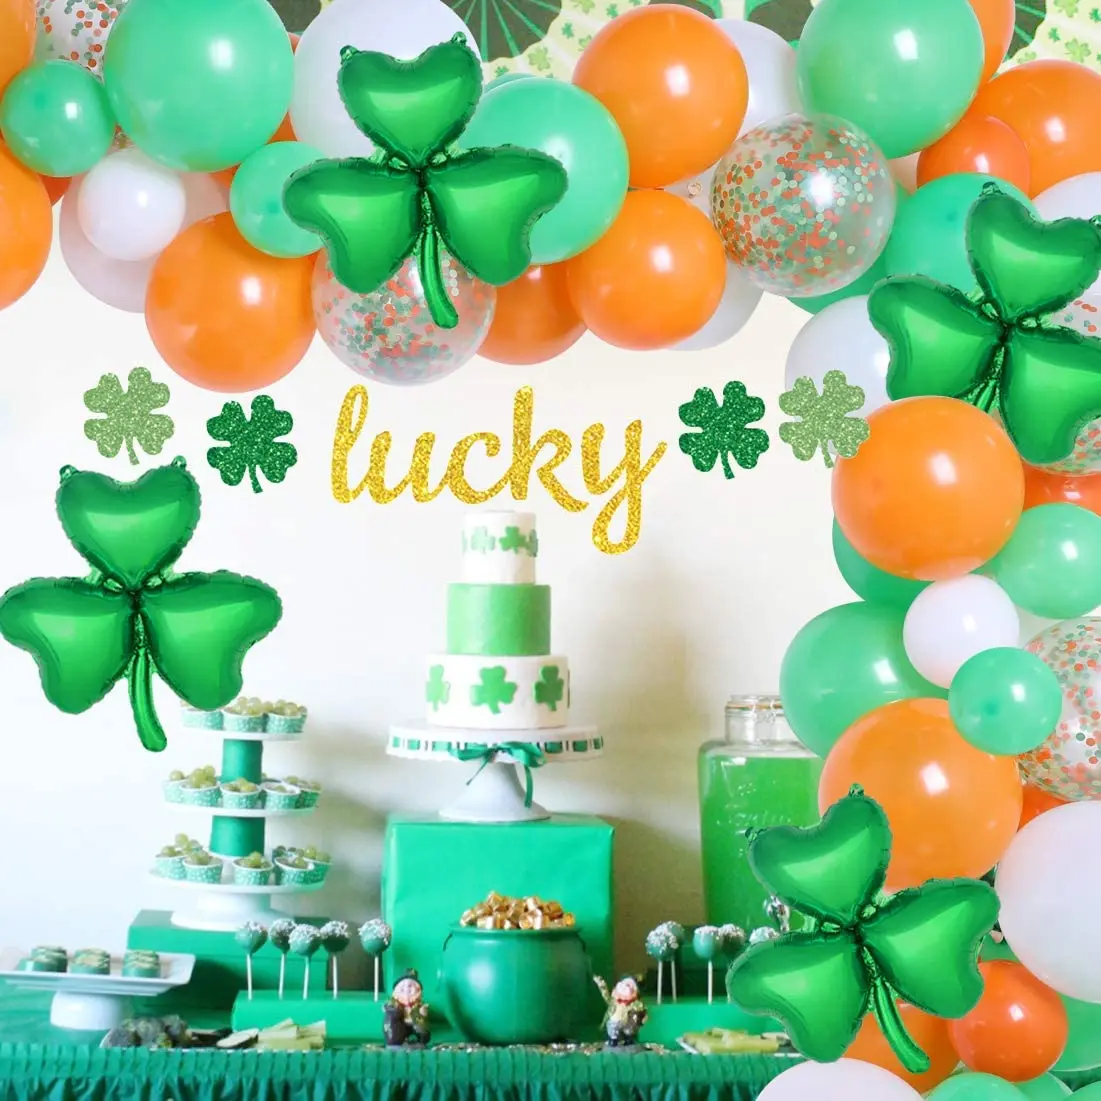 

Green and White Balloon Arch Garland Decorations Lucky Bunting Banner Shamrock Clover Foil Balloon for Women Birthday